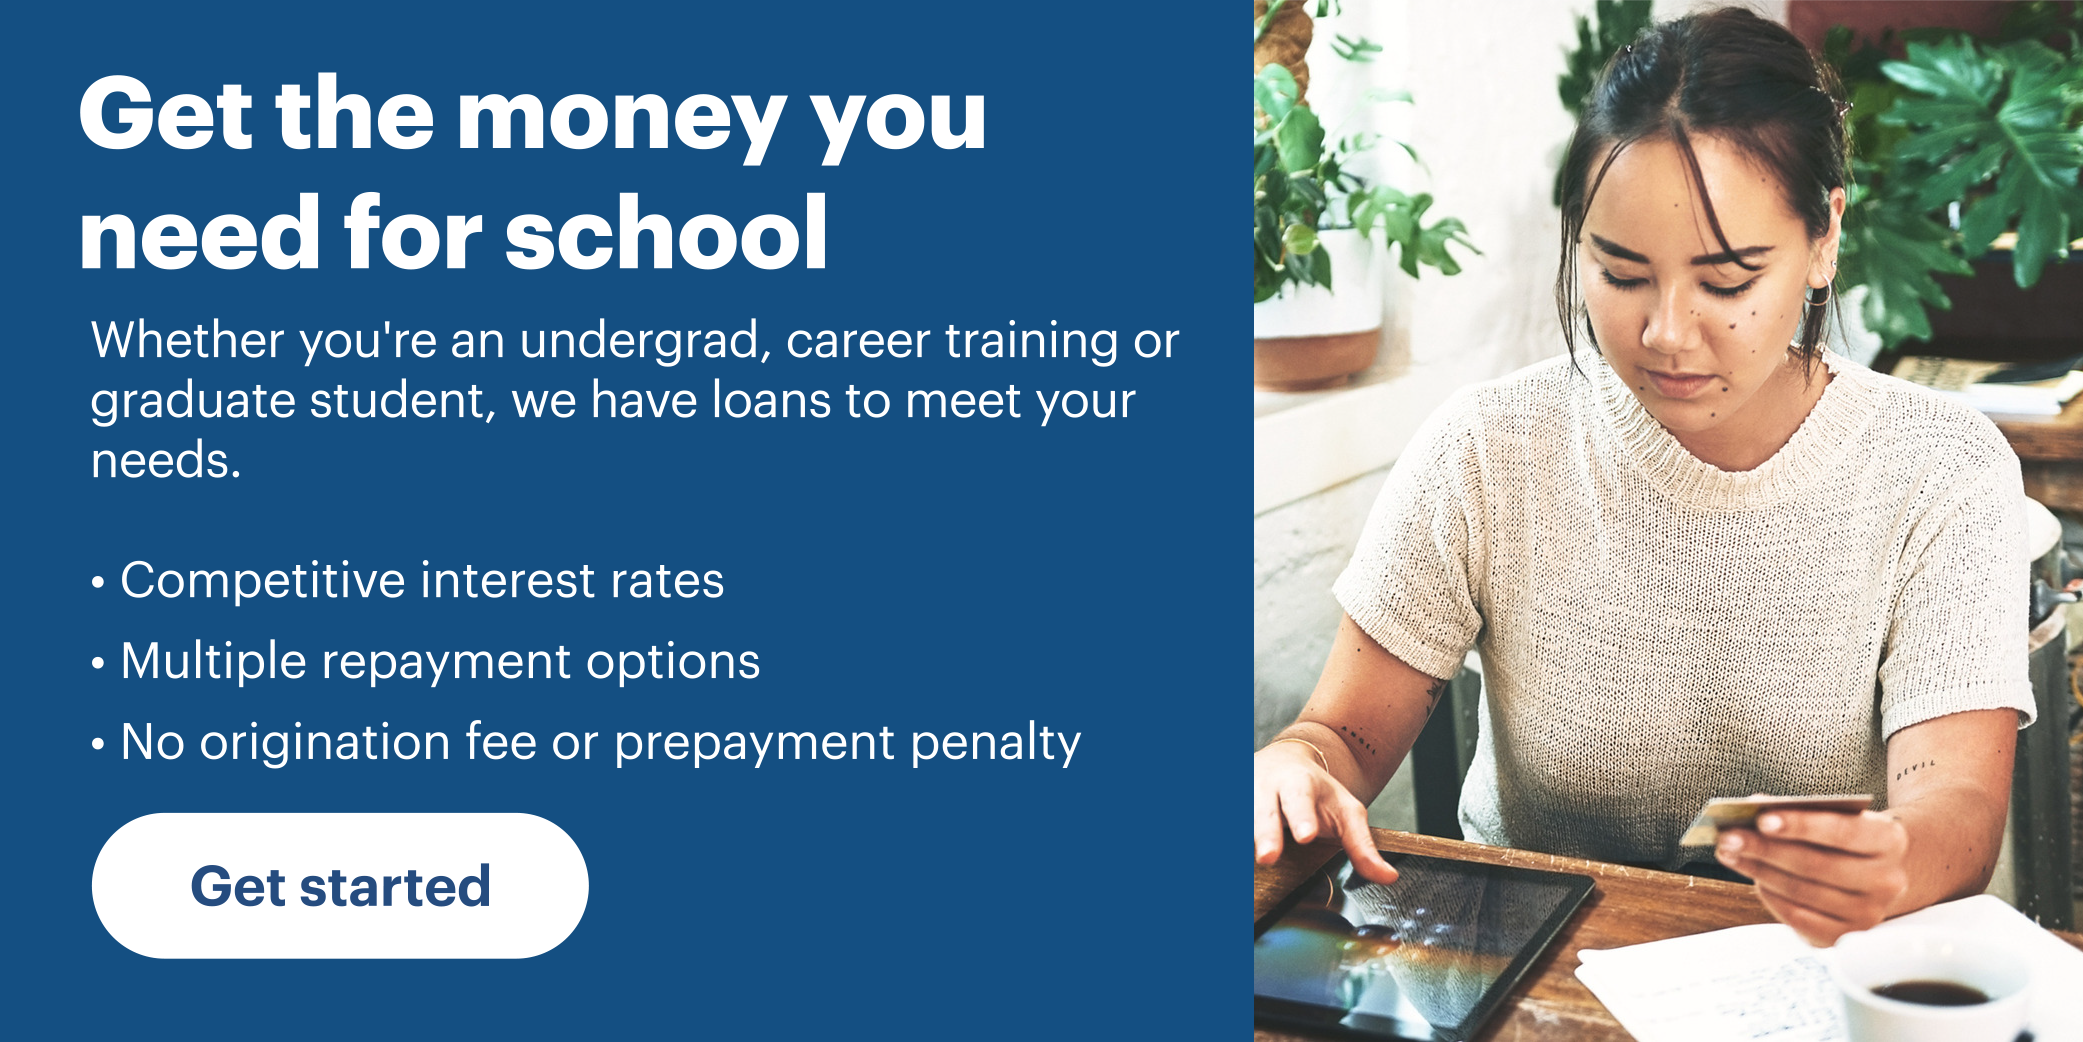 Get the money you need for school. Whether you're an undergrad, career training or graduate student, we have loans to meet your needs. Competitive interest rates. Multiple repayment options. No origination fee for prepayment penalty.